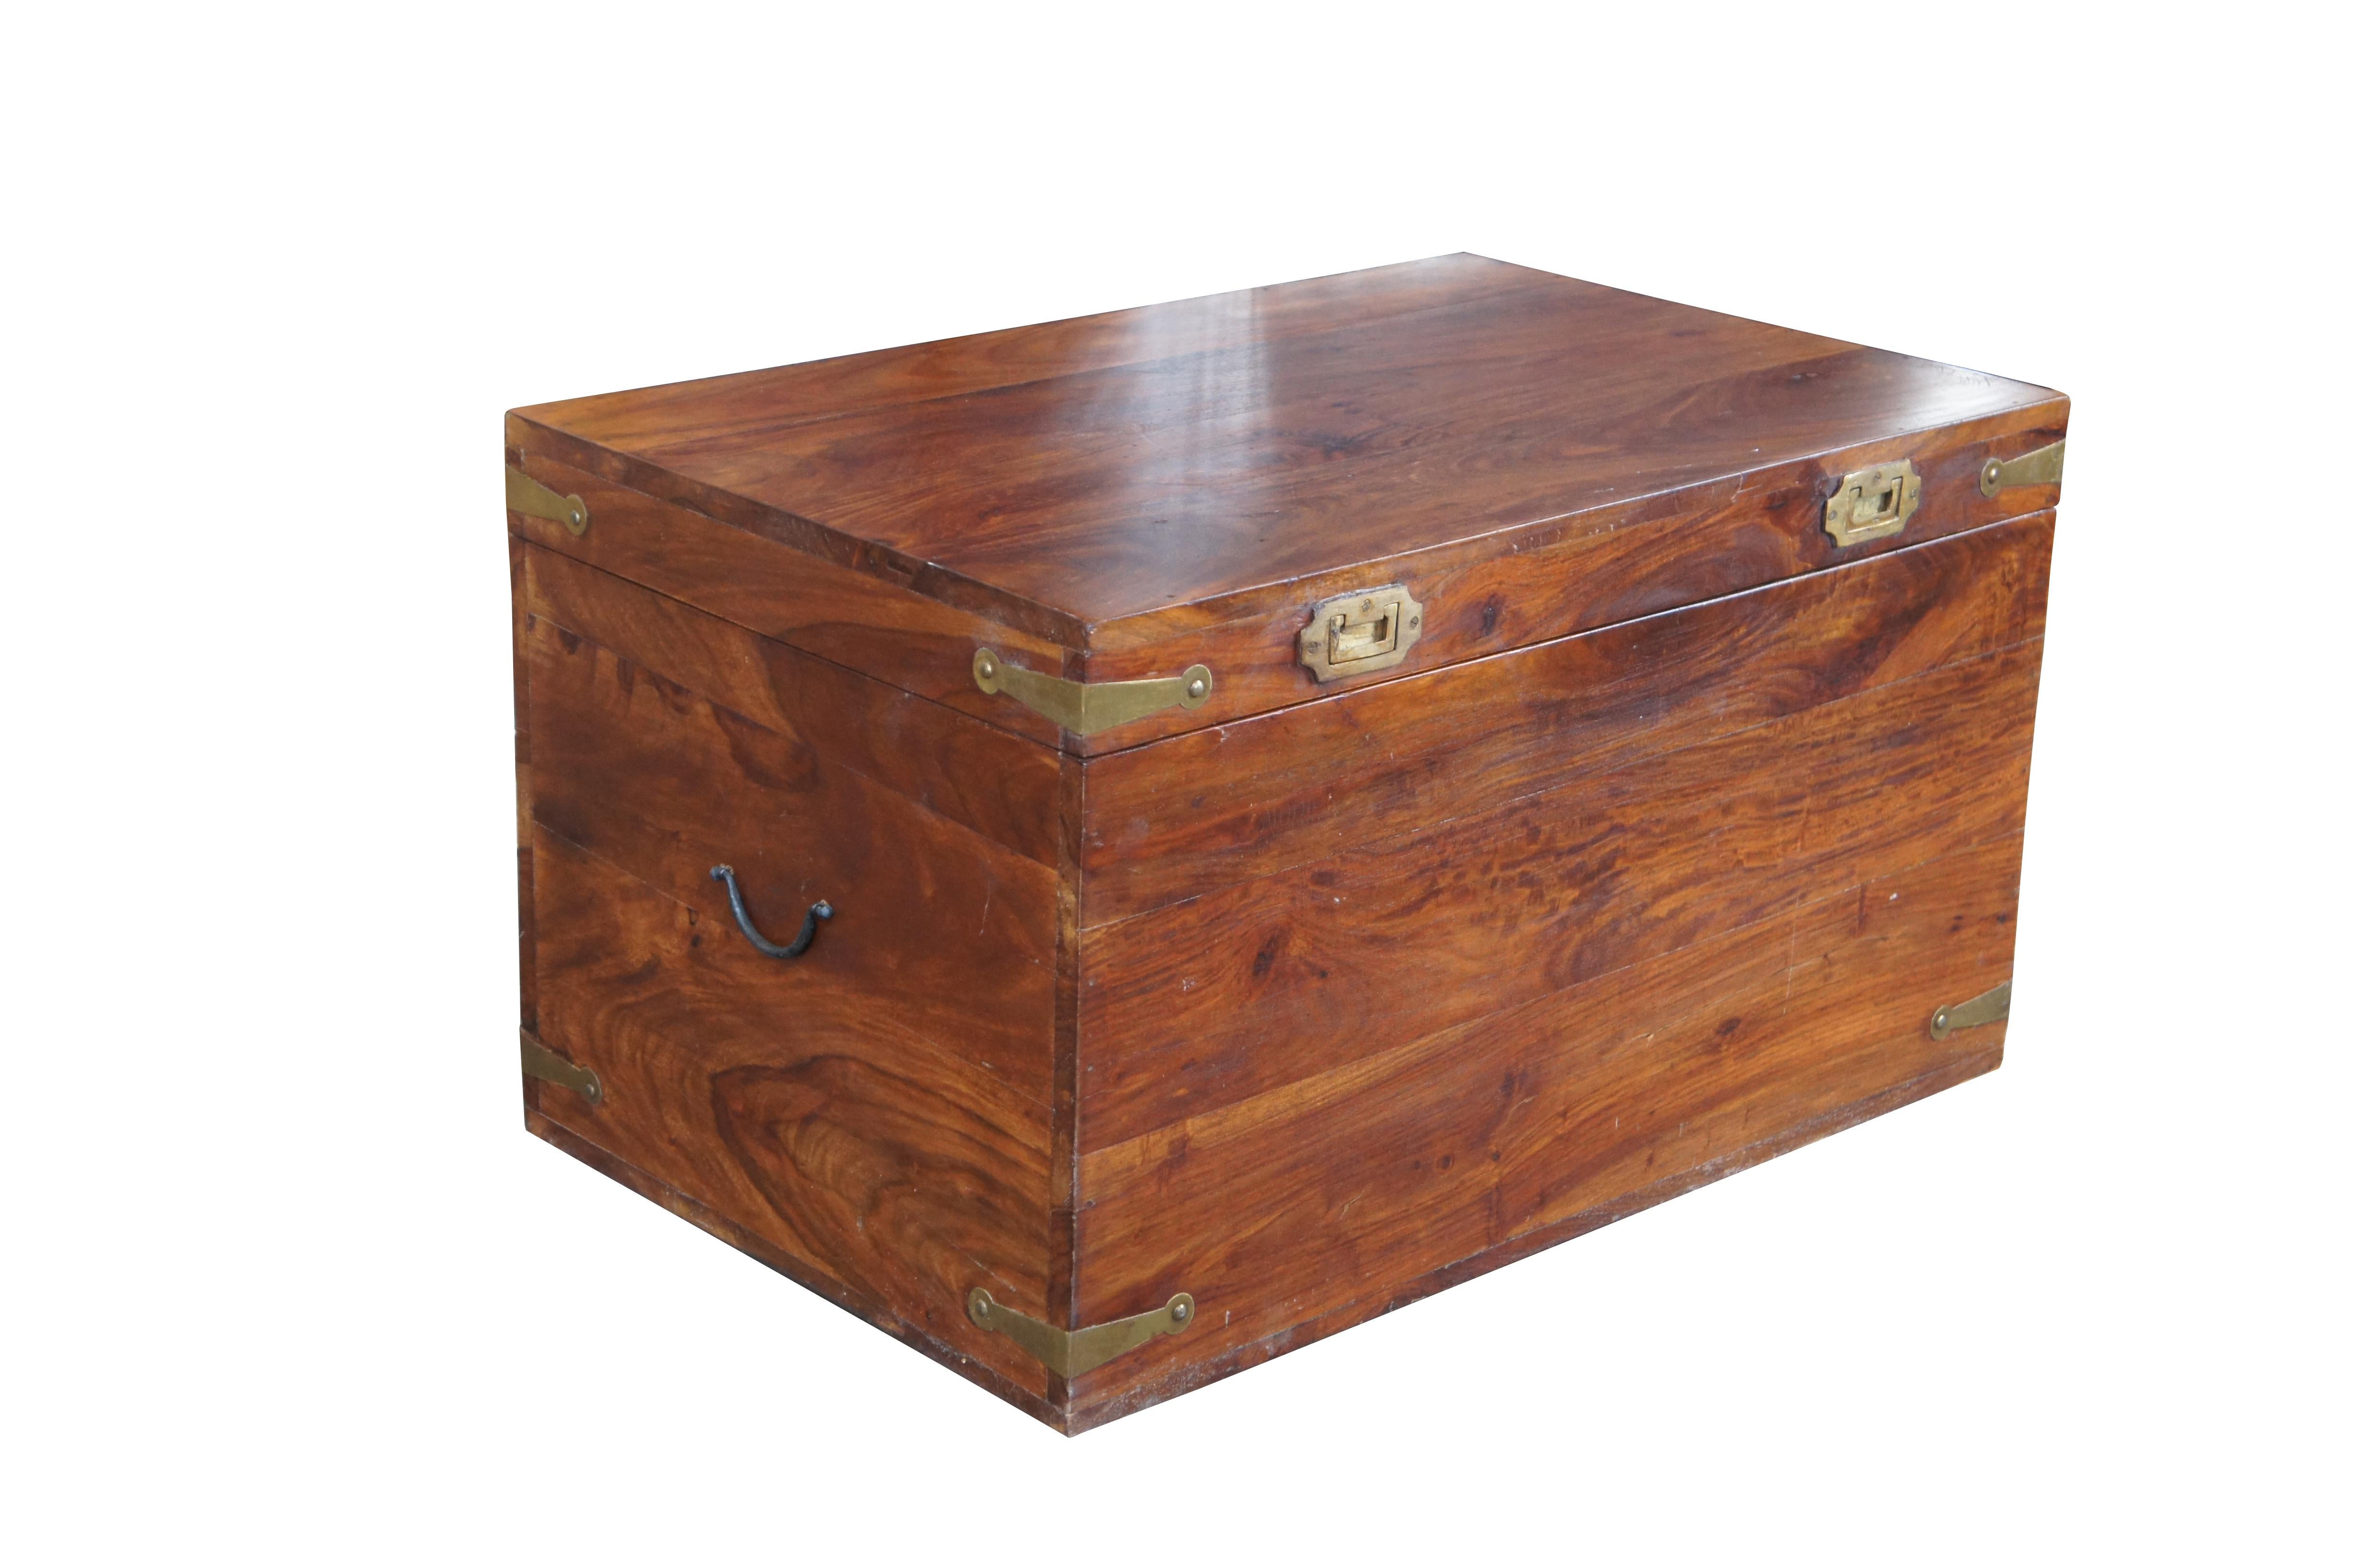 Late 20th century campaign style camphor chest. Features a rectangular frame with brass banded hand hardware and traditional campaign / anglo indian recessed pulls along the front.

Dimensions:
15.5